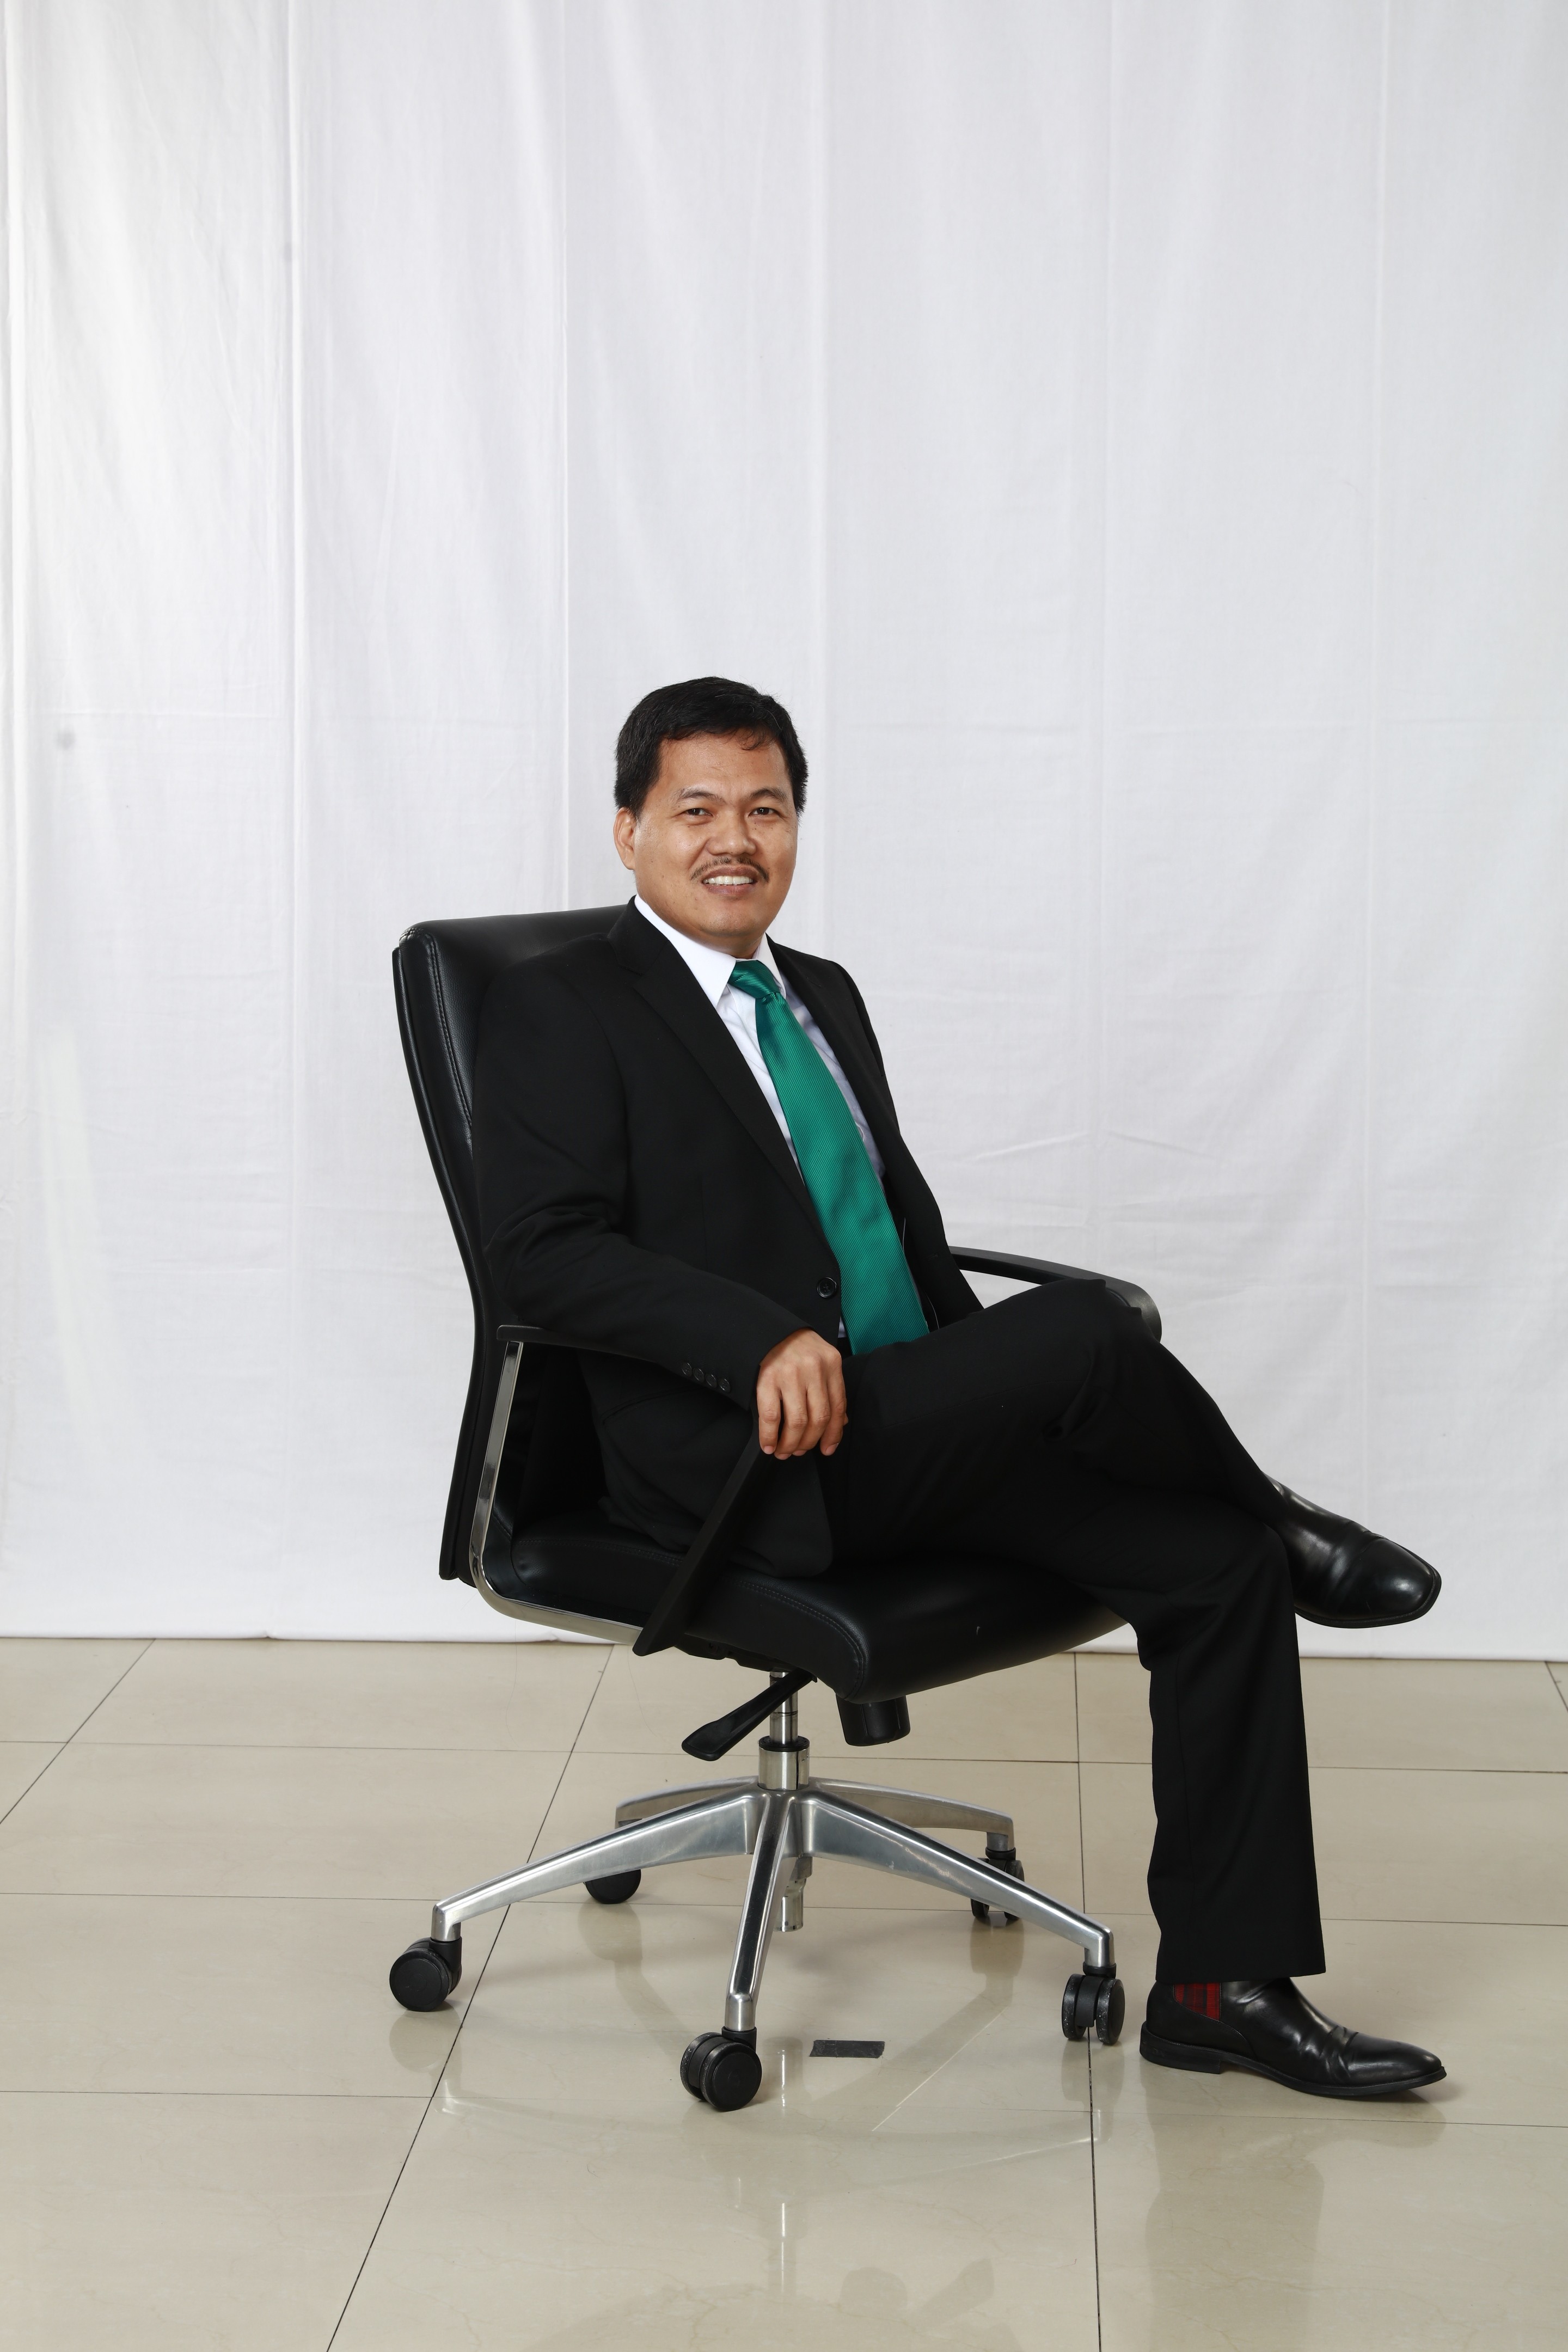 Chryss Damuy, president and CEO